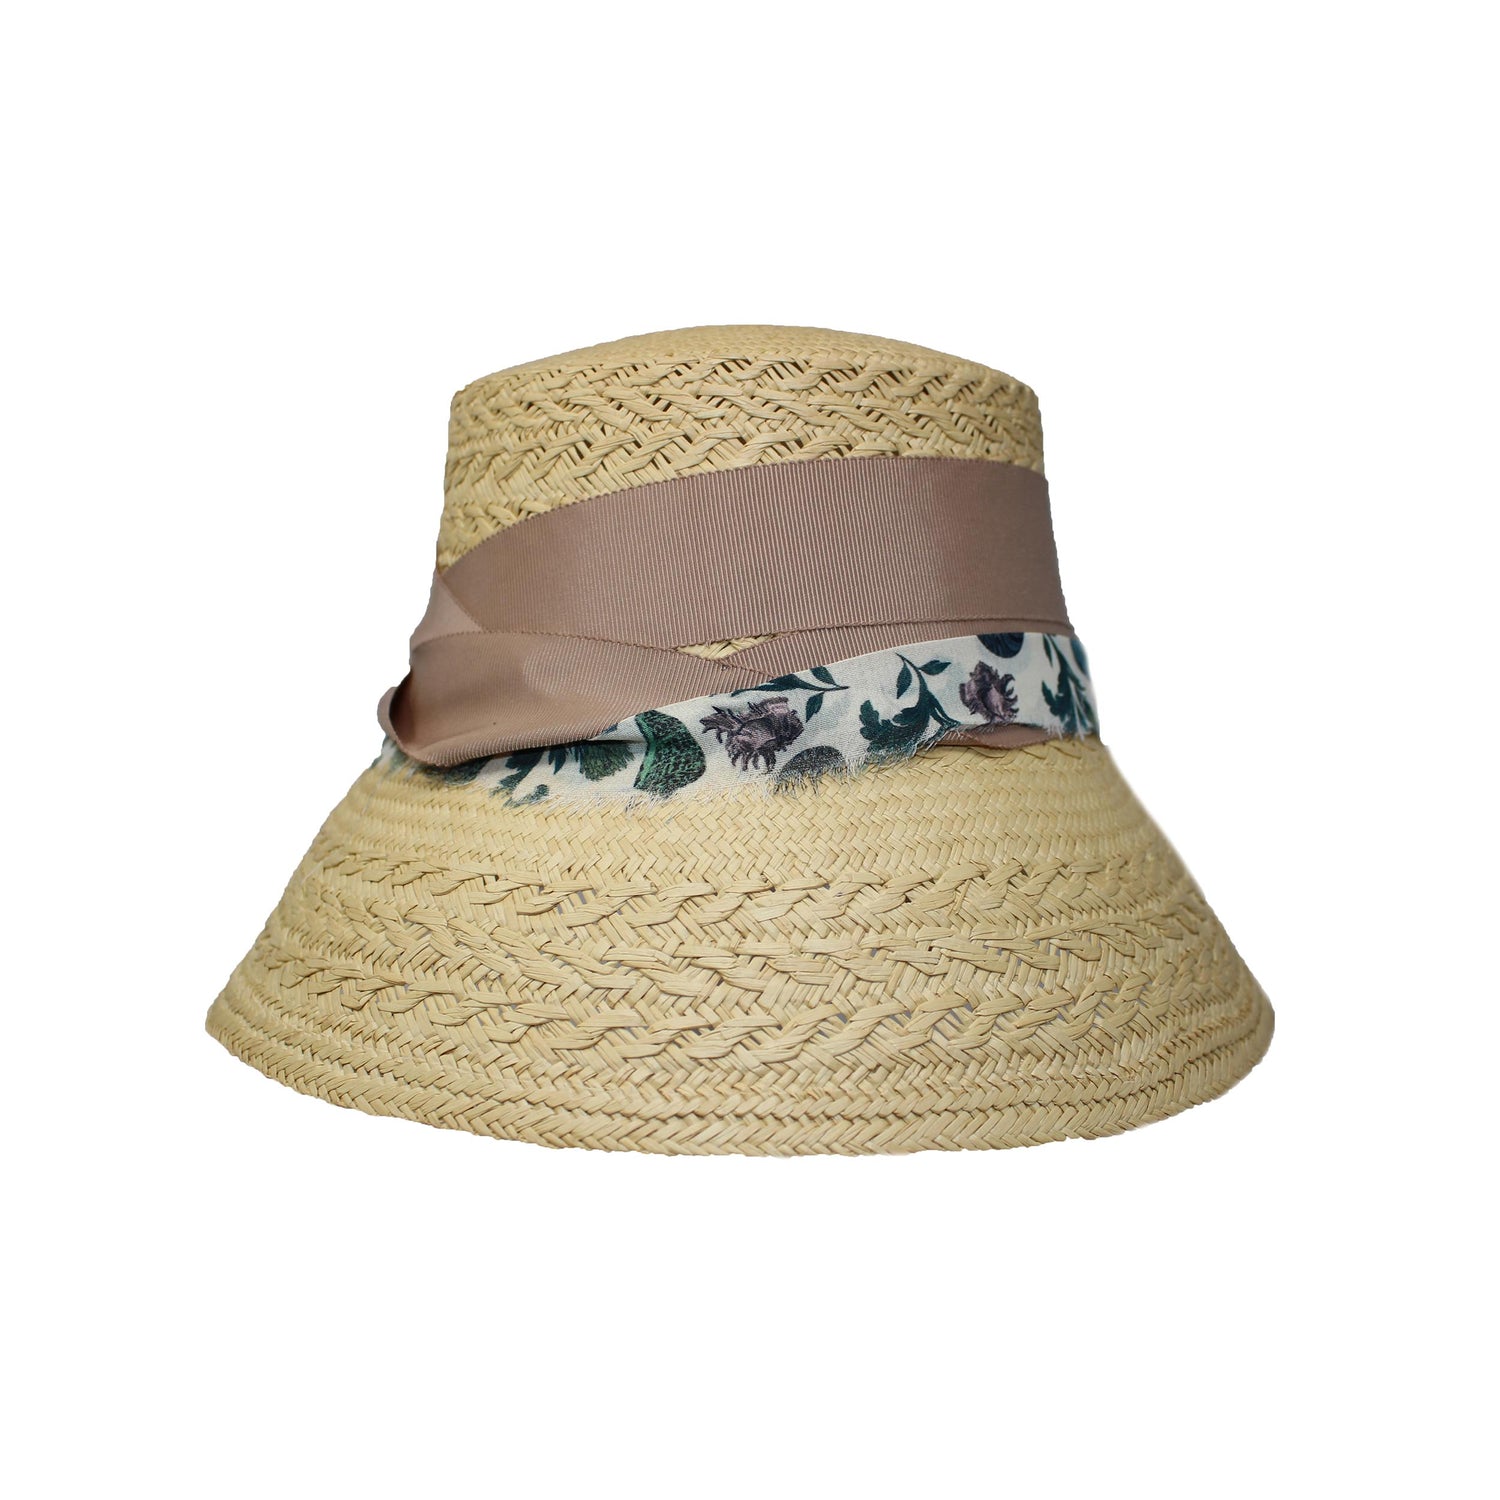 Texturized Straw Lampshade Hat